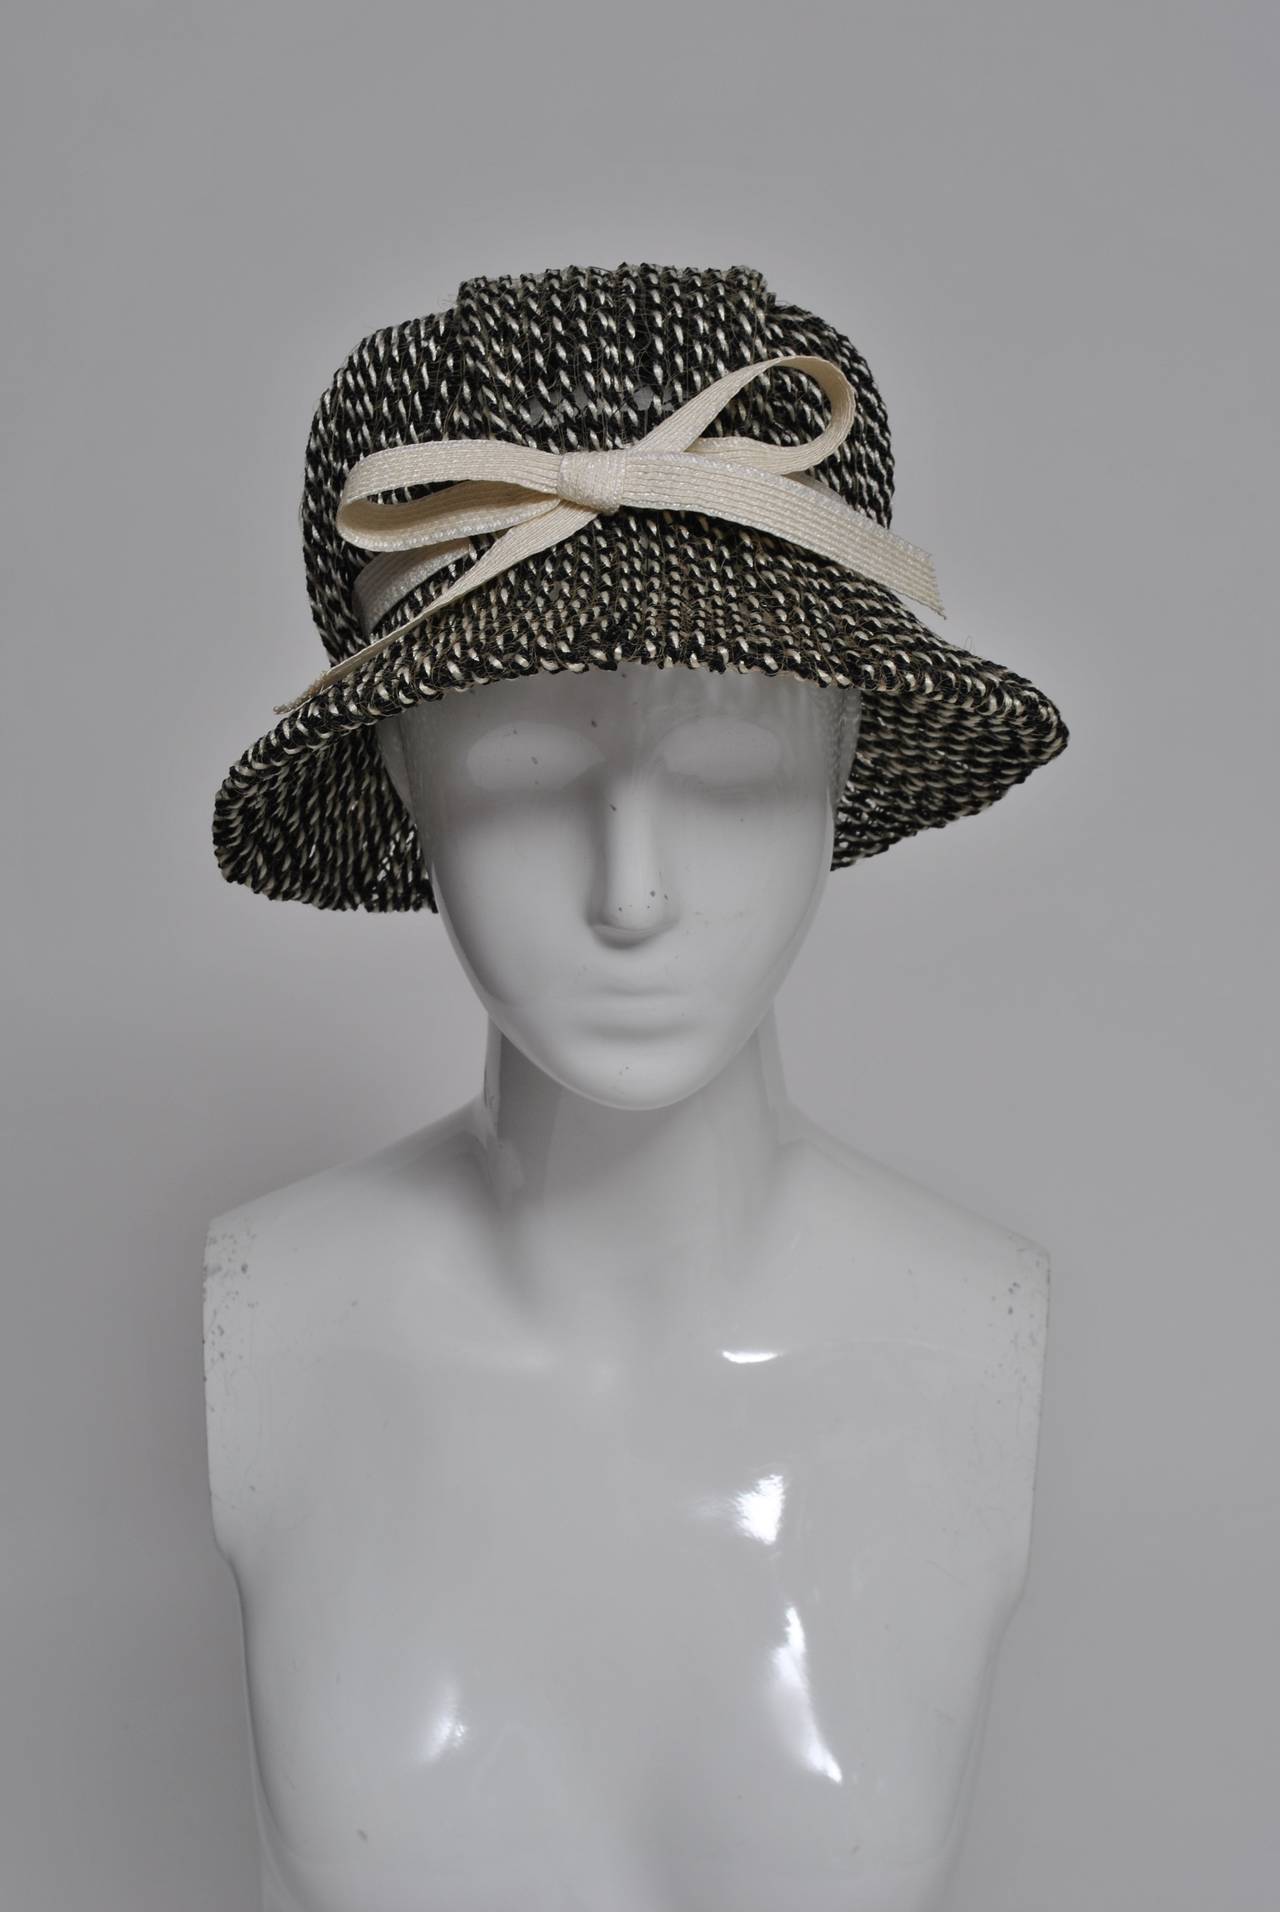 Unusual hat of twisted black/white straw on a mesh background featuring a wide brim and high crown. Beige ribbon trim with bow accents the hat. Looks unused. A beautiful example of the work of one of America's best milliners.